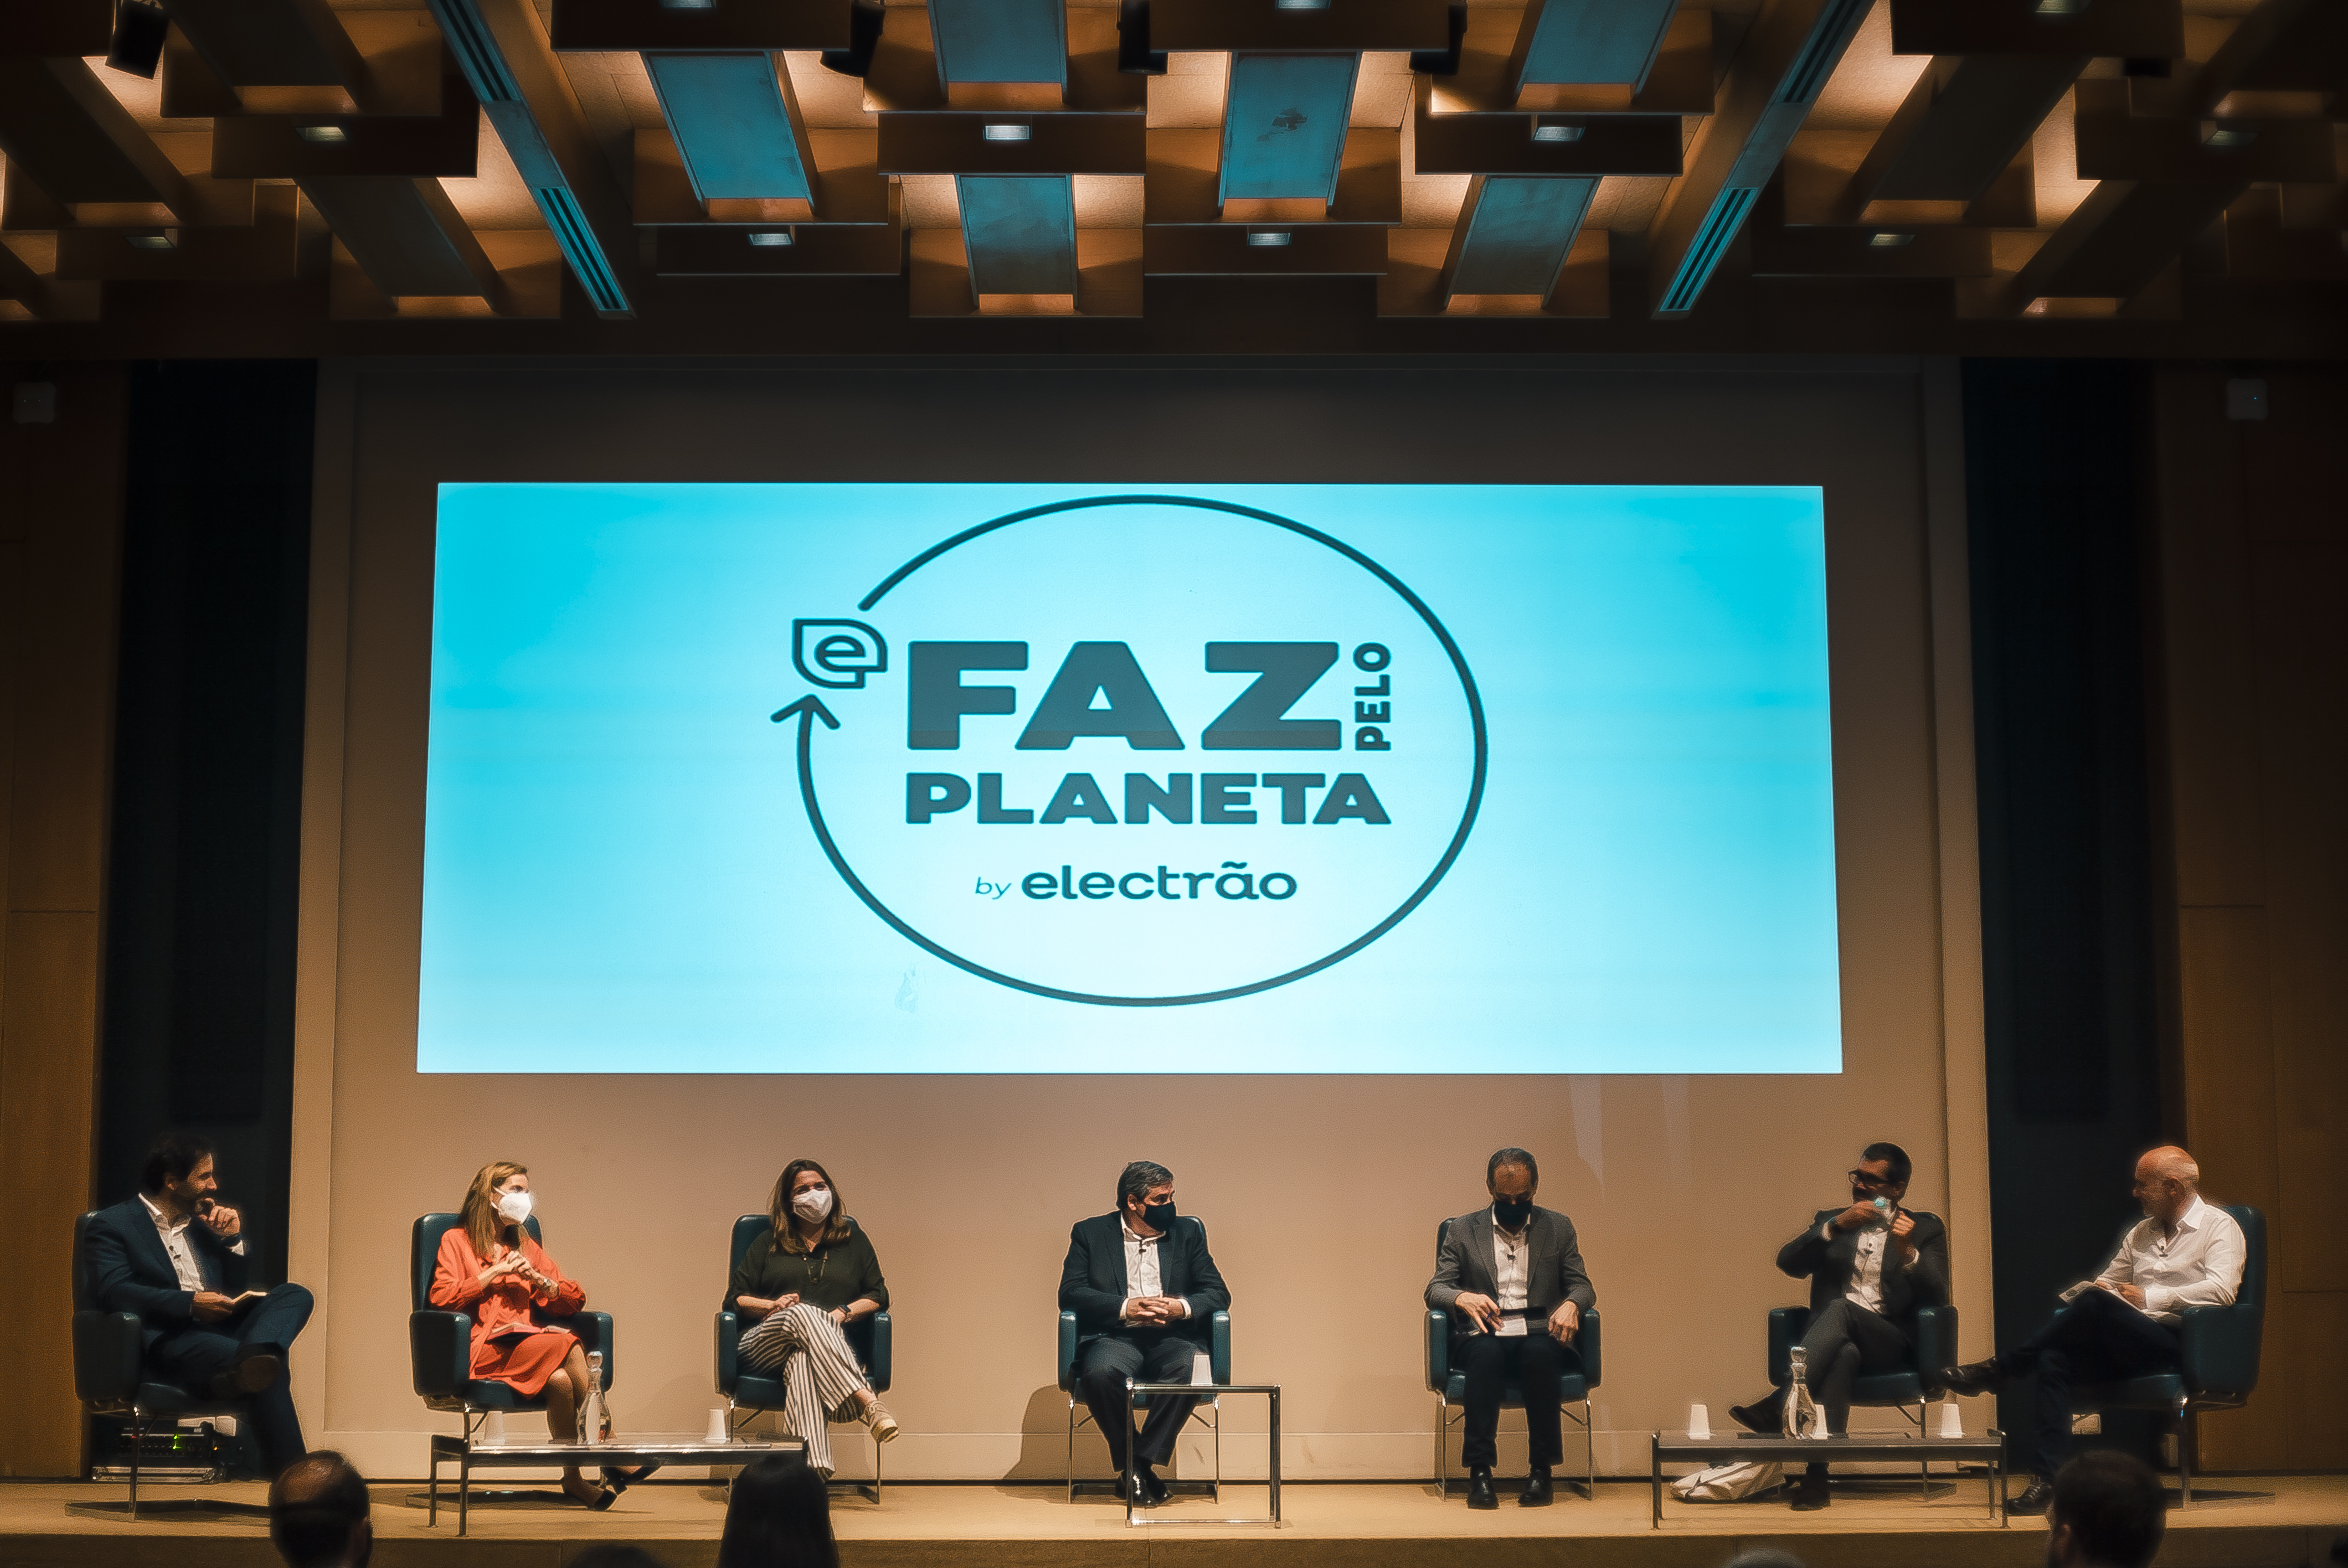 <span class="data" style="color:#6cca98">May</span><br/>Launch of the “Faz Pelo Planeta by Electrão” Movement